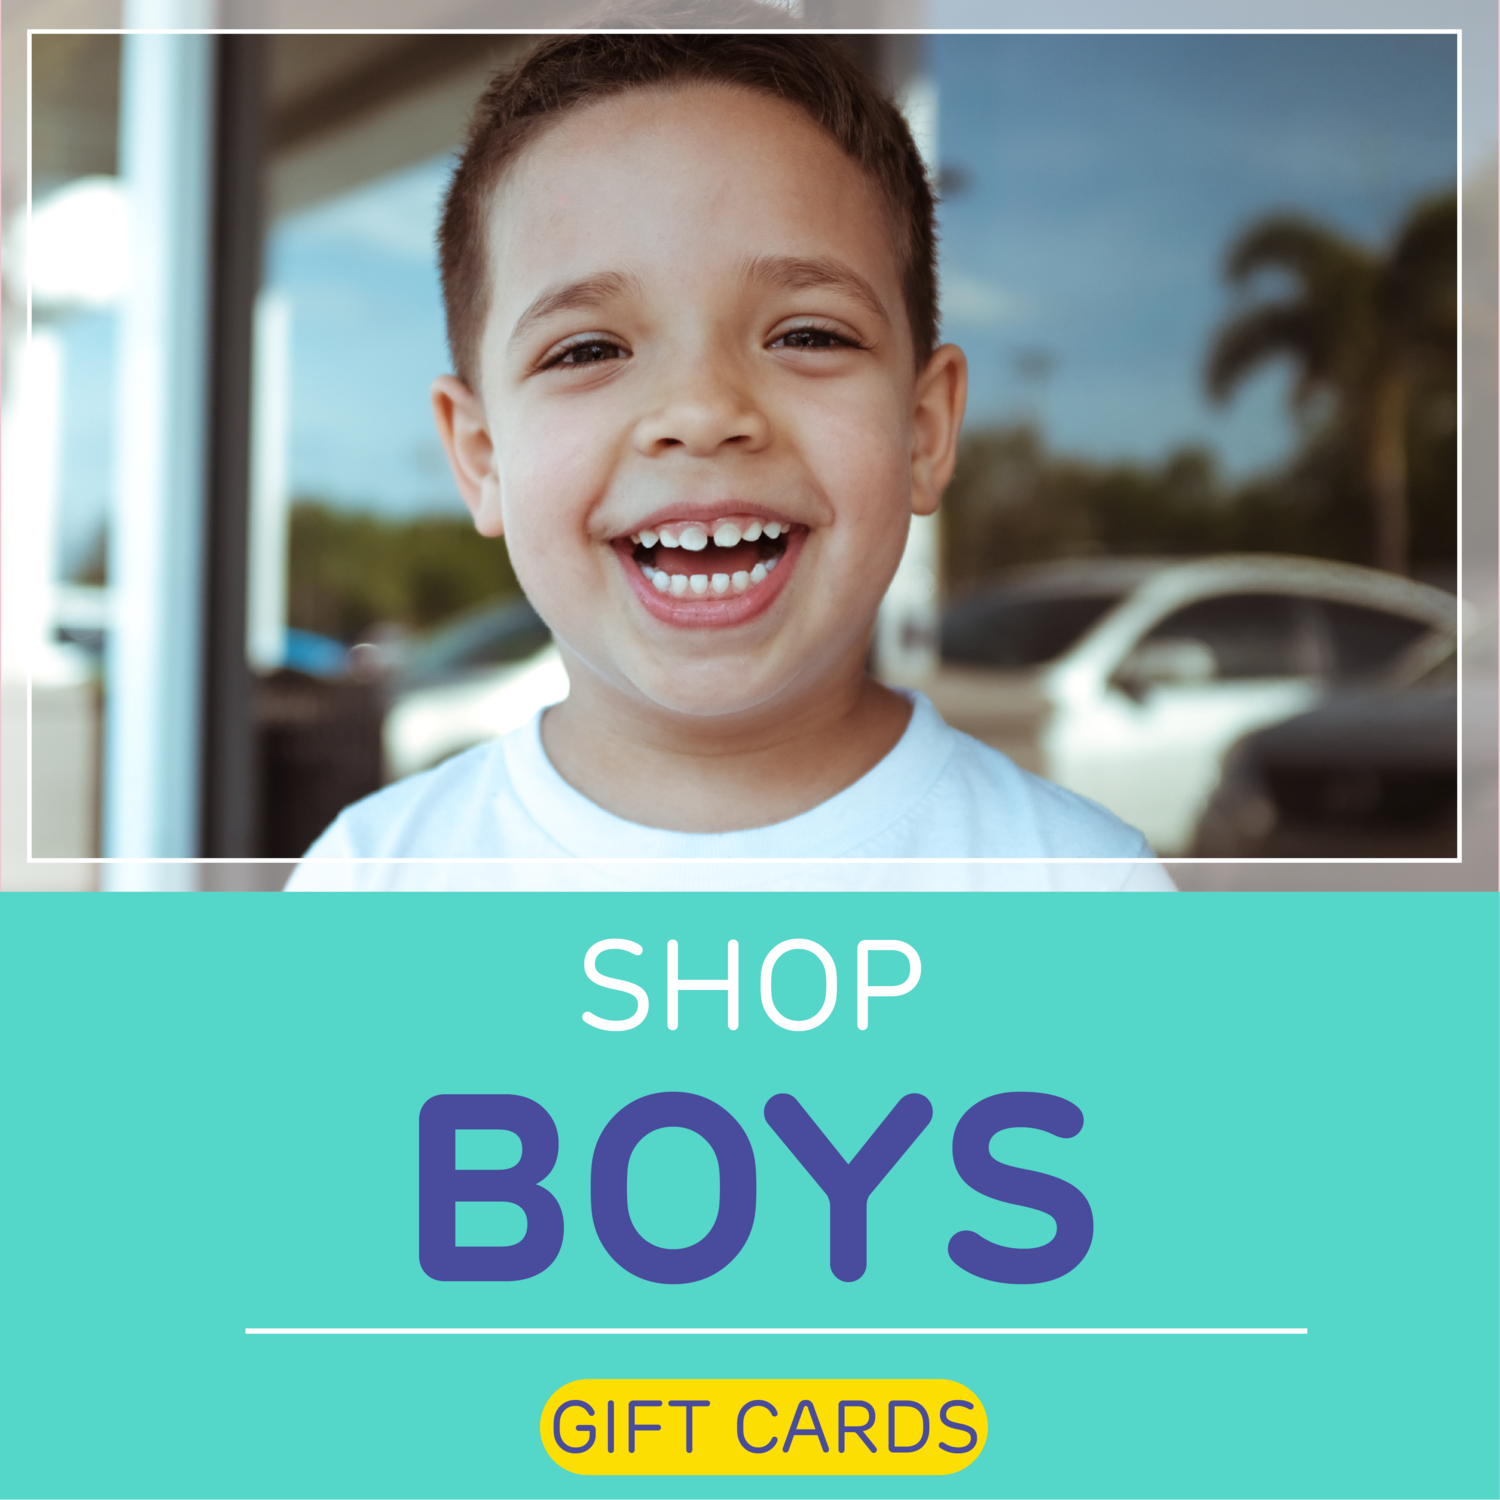 Boys Gift Cards